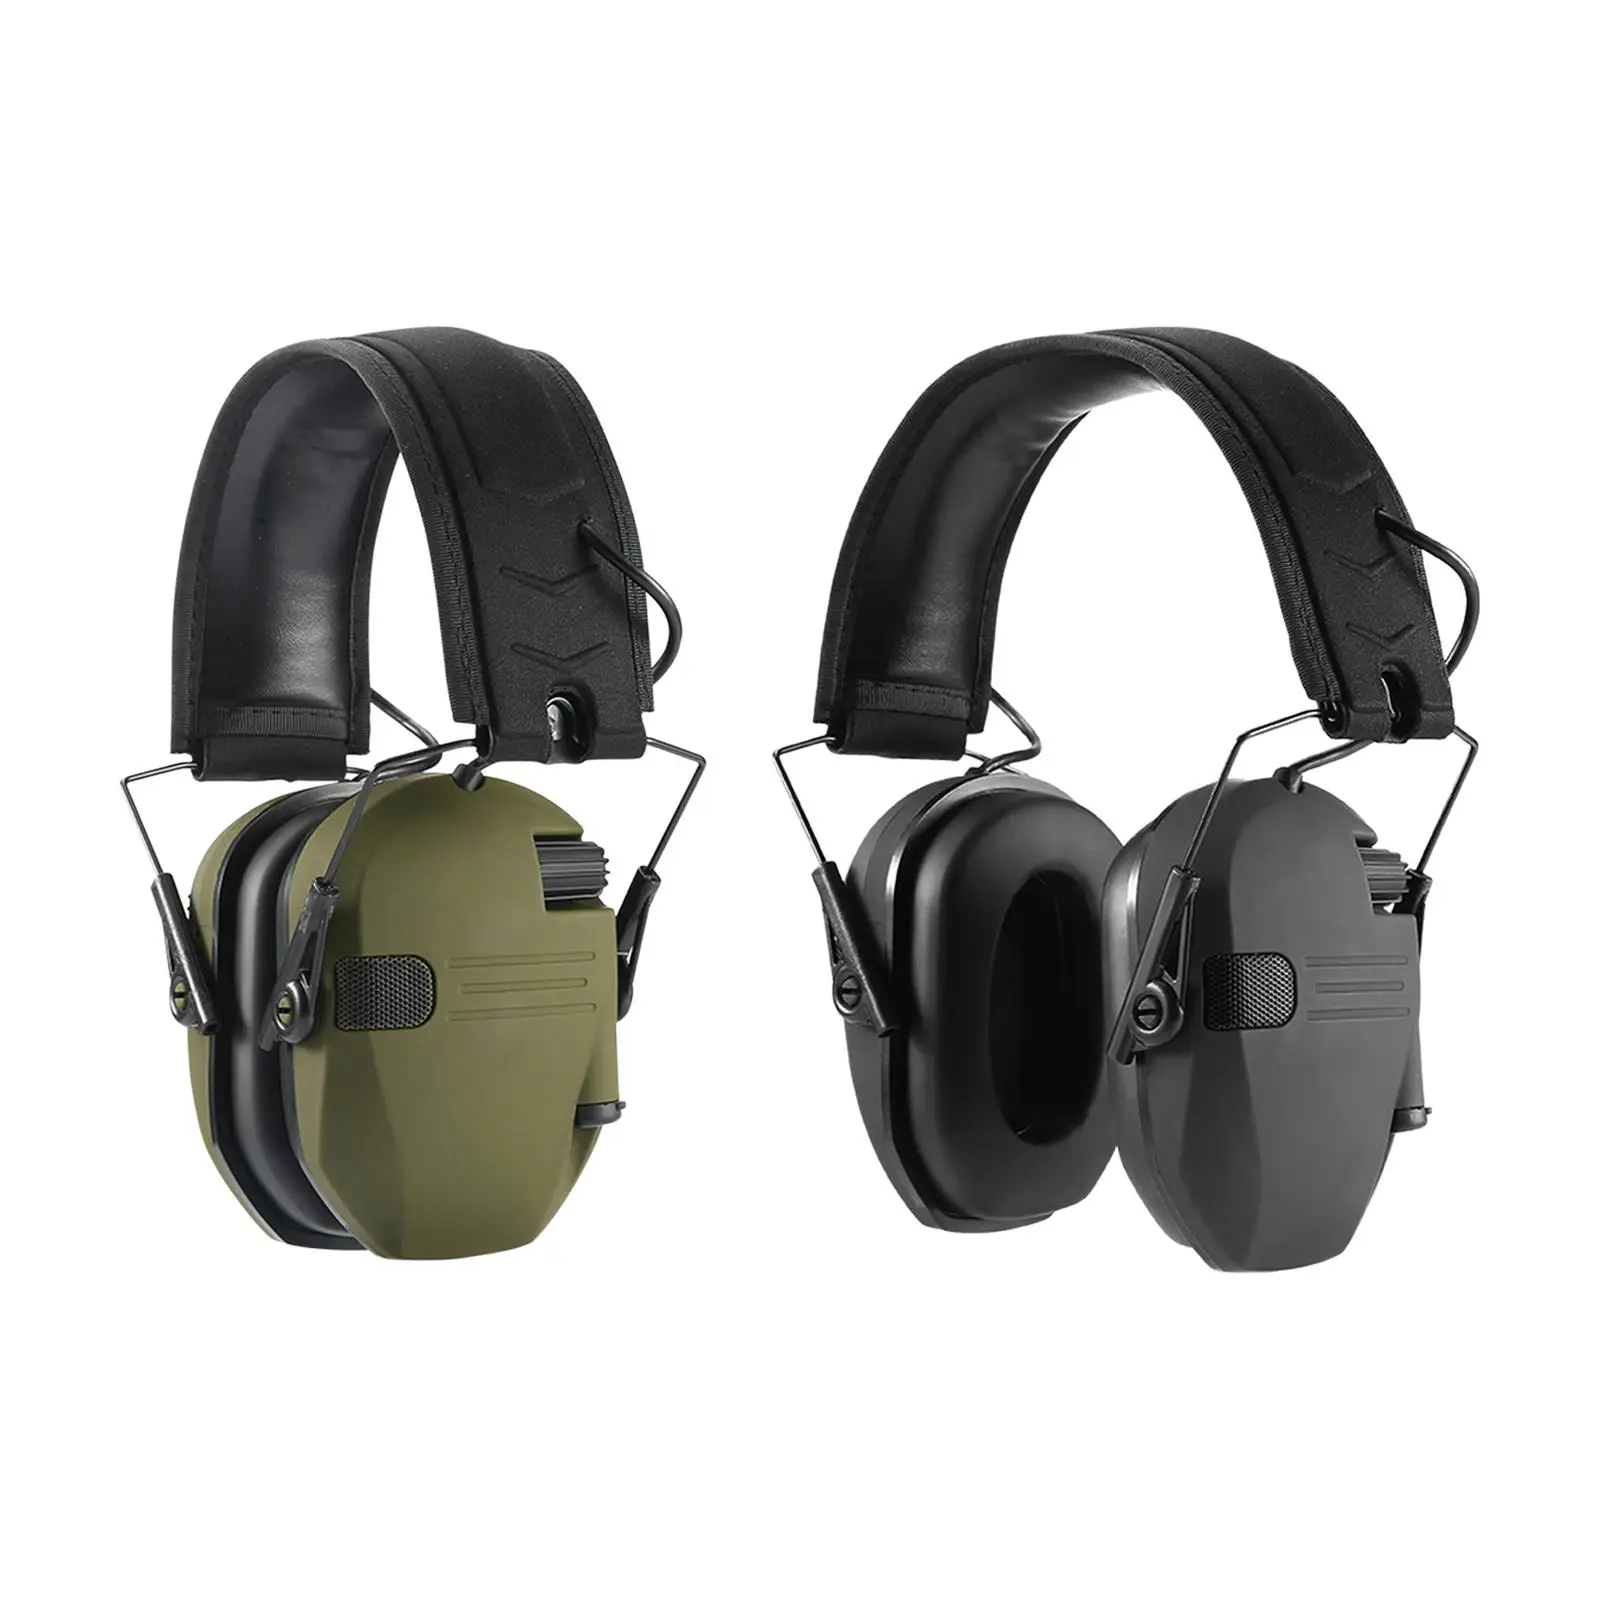 Electronic Earmuffs Safety Ear Muffs for Construction Mowing Gaming